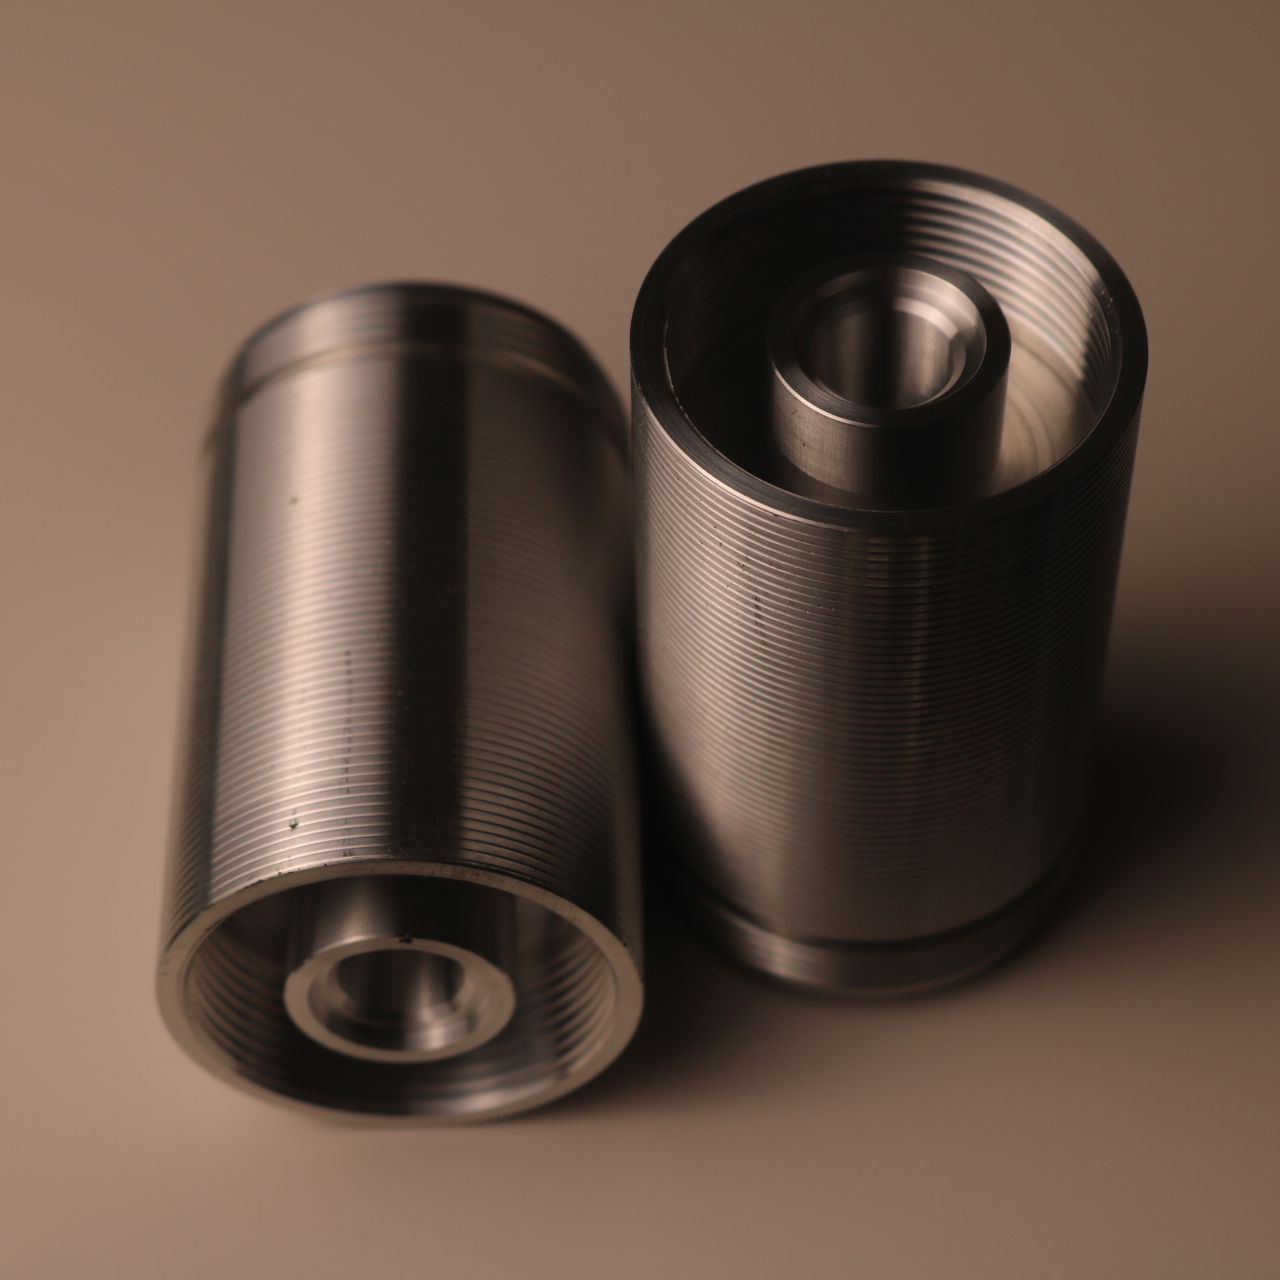 CNC Lathe Machining Services for Circular Threaded Parts